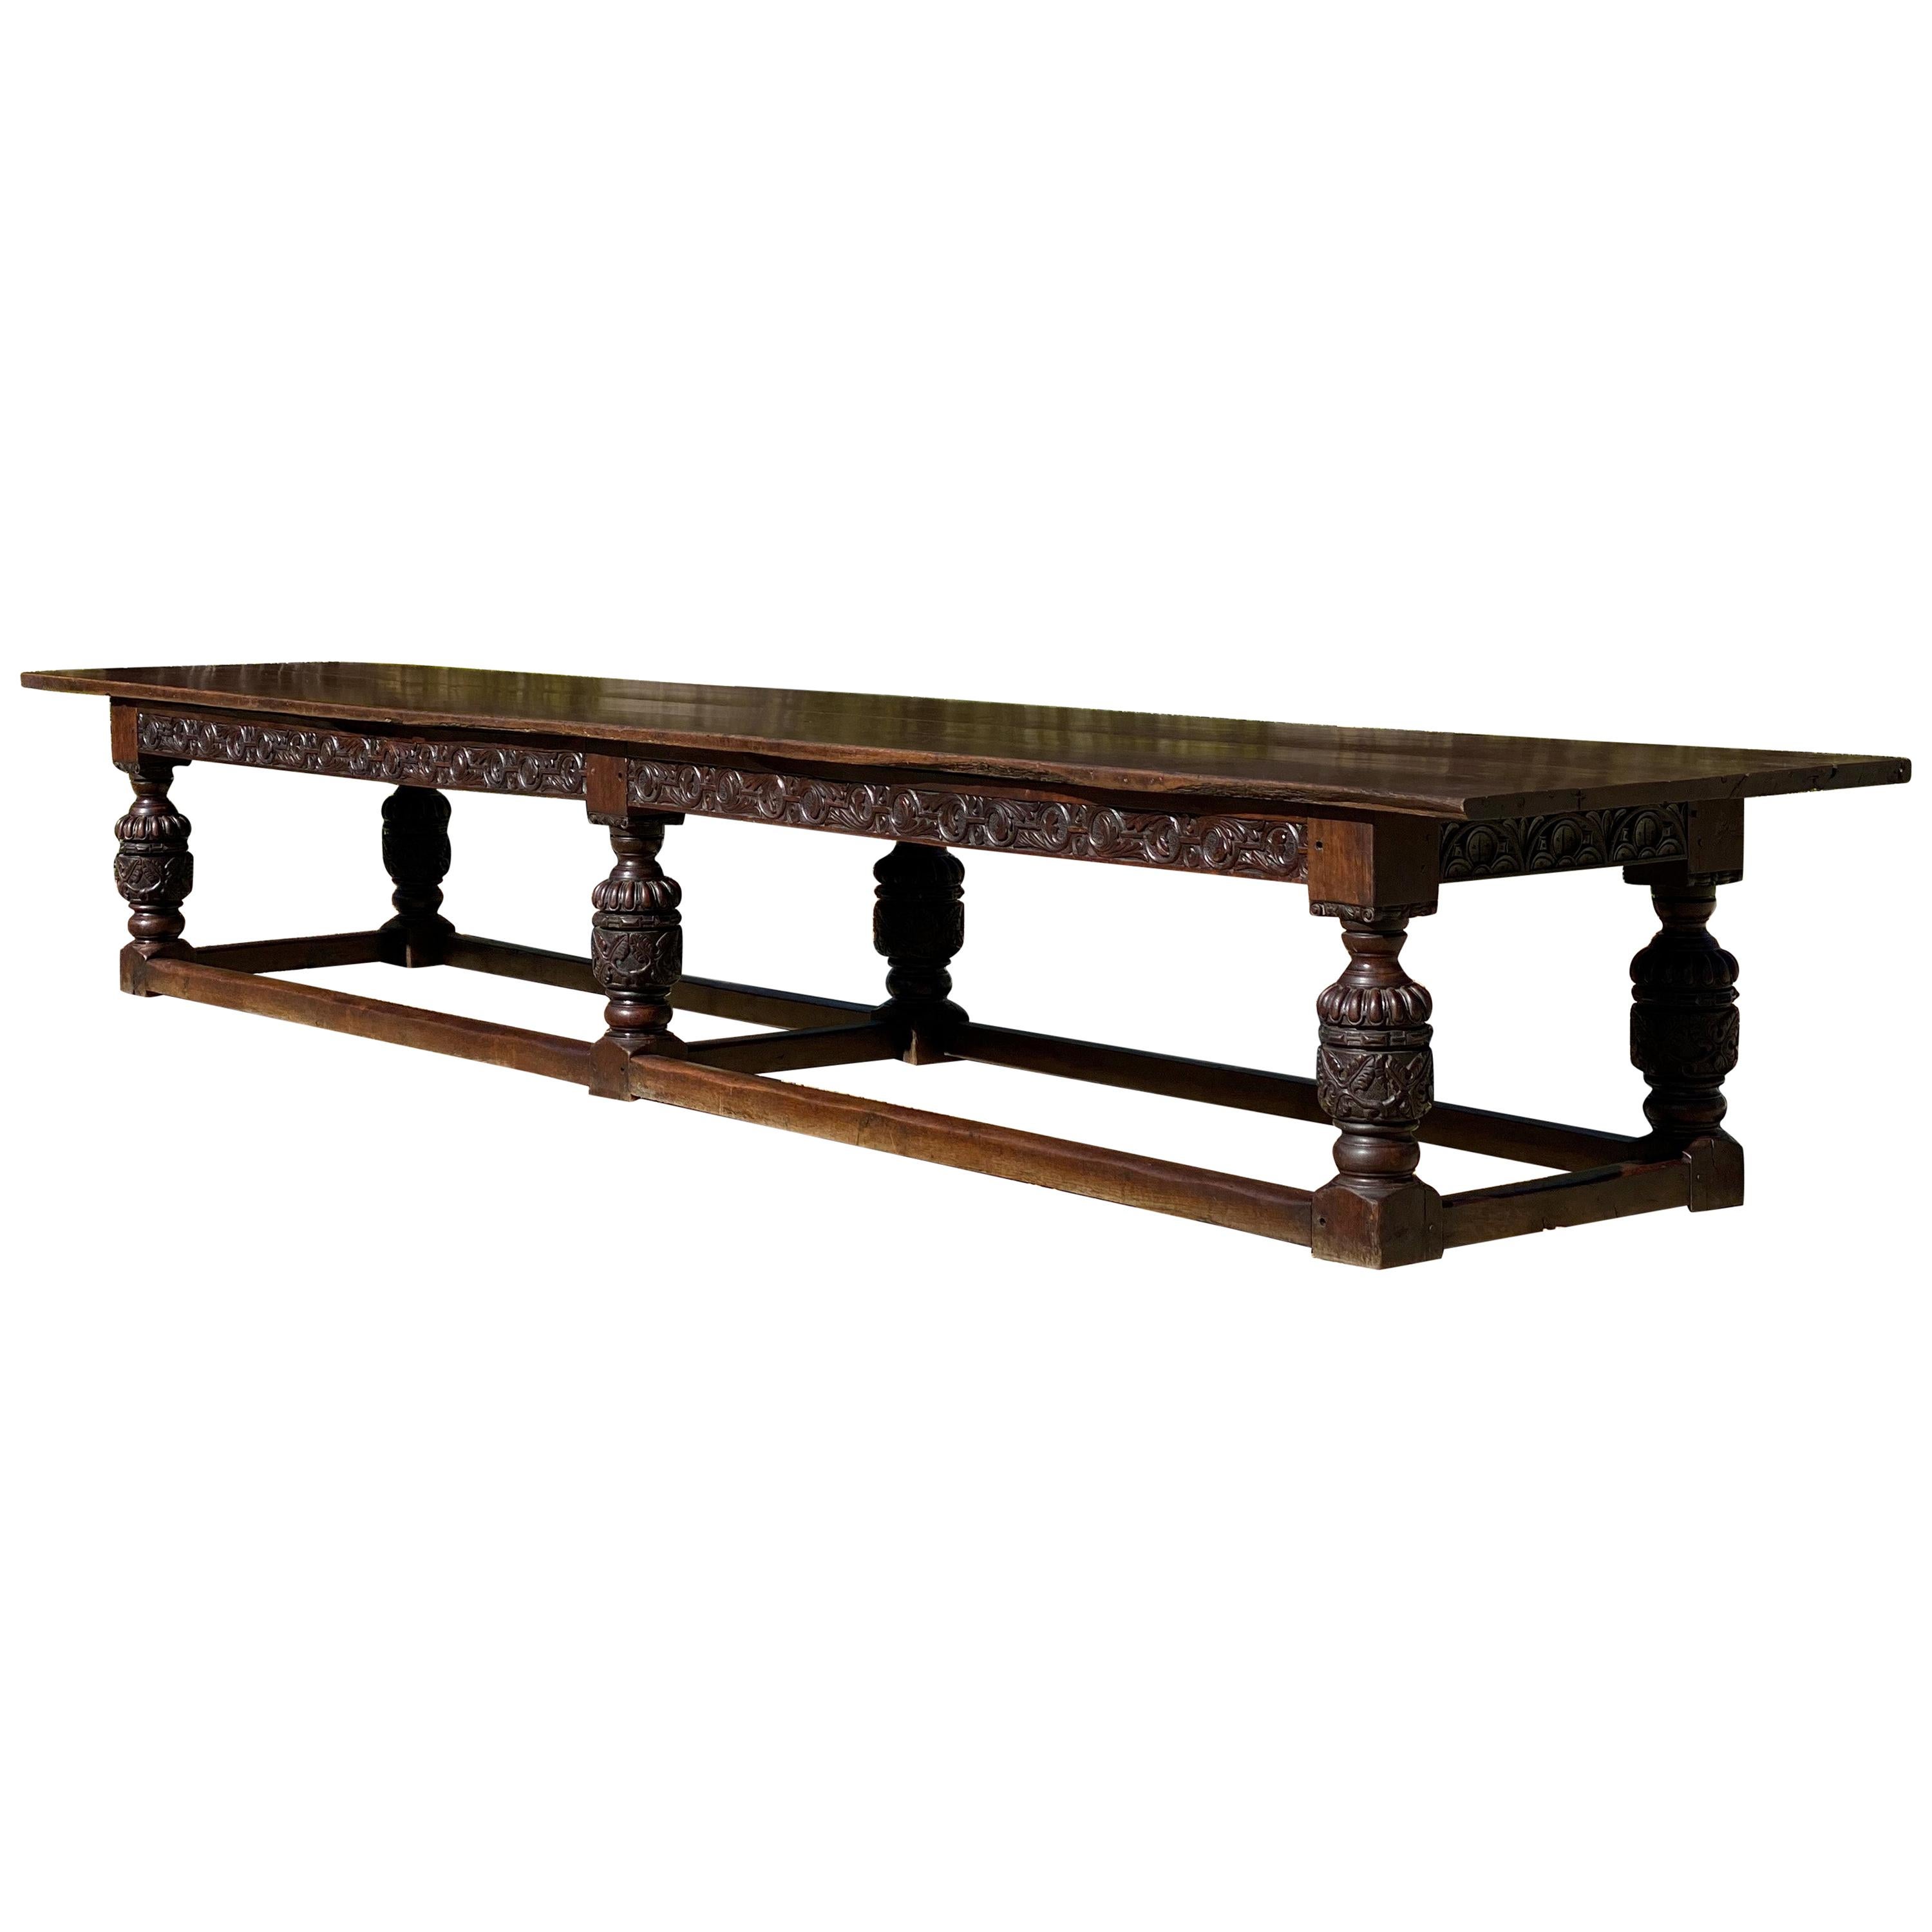 17th Century Charles II Oak Refectory Table Banquet Dining Table, circa 1660